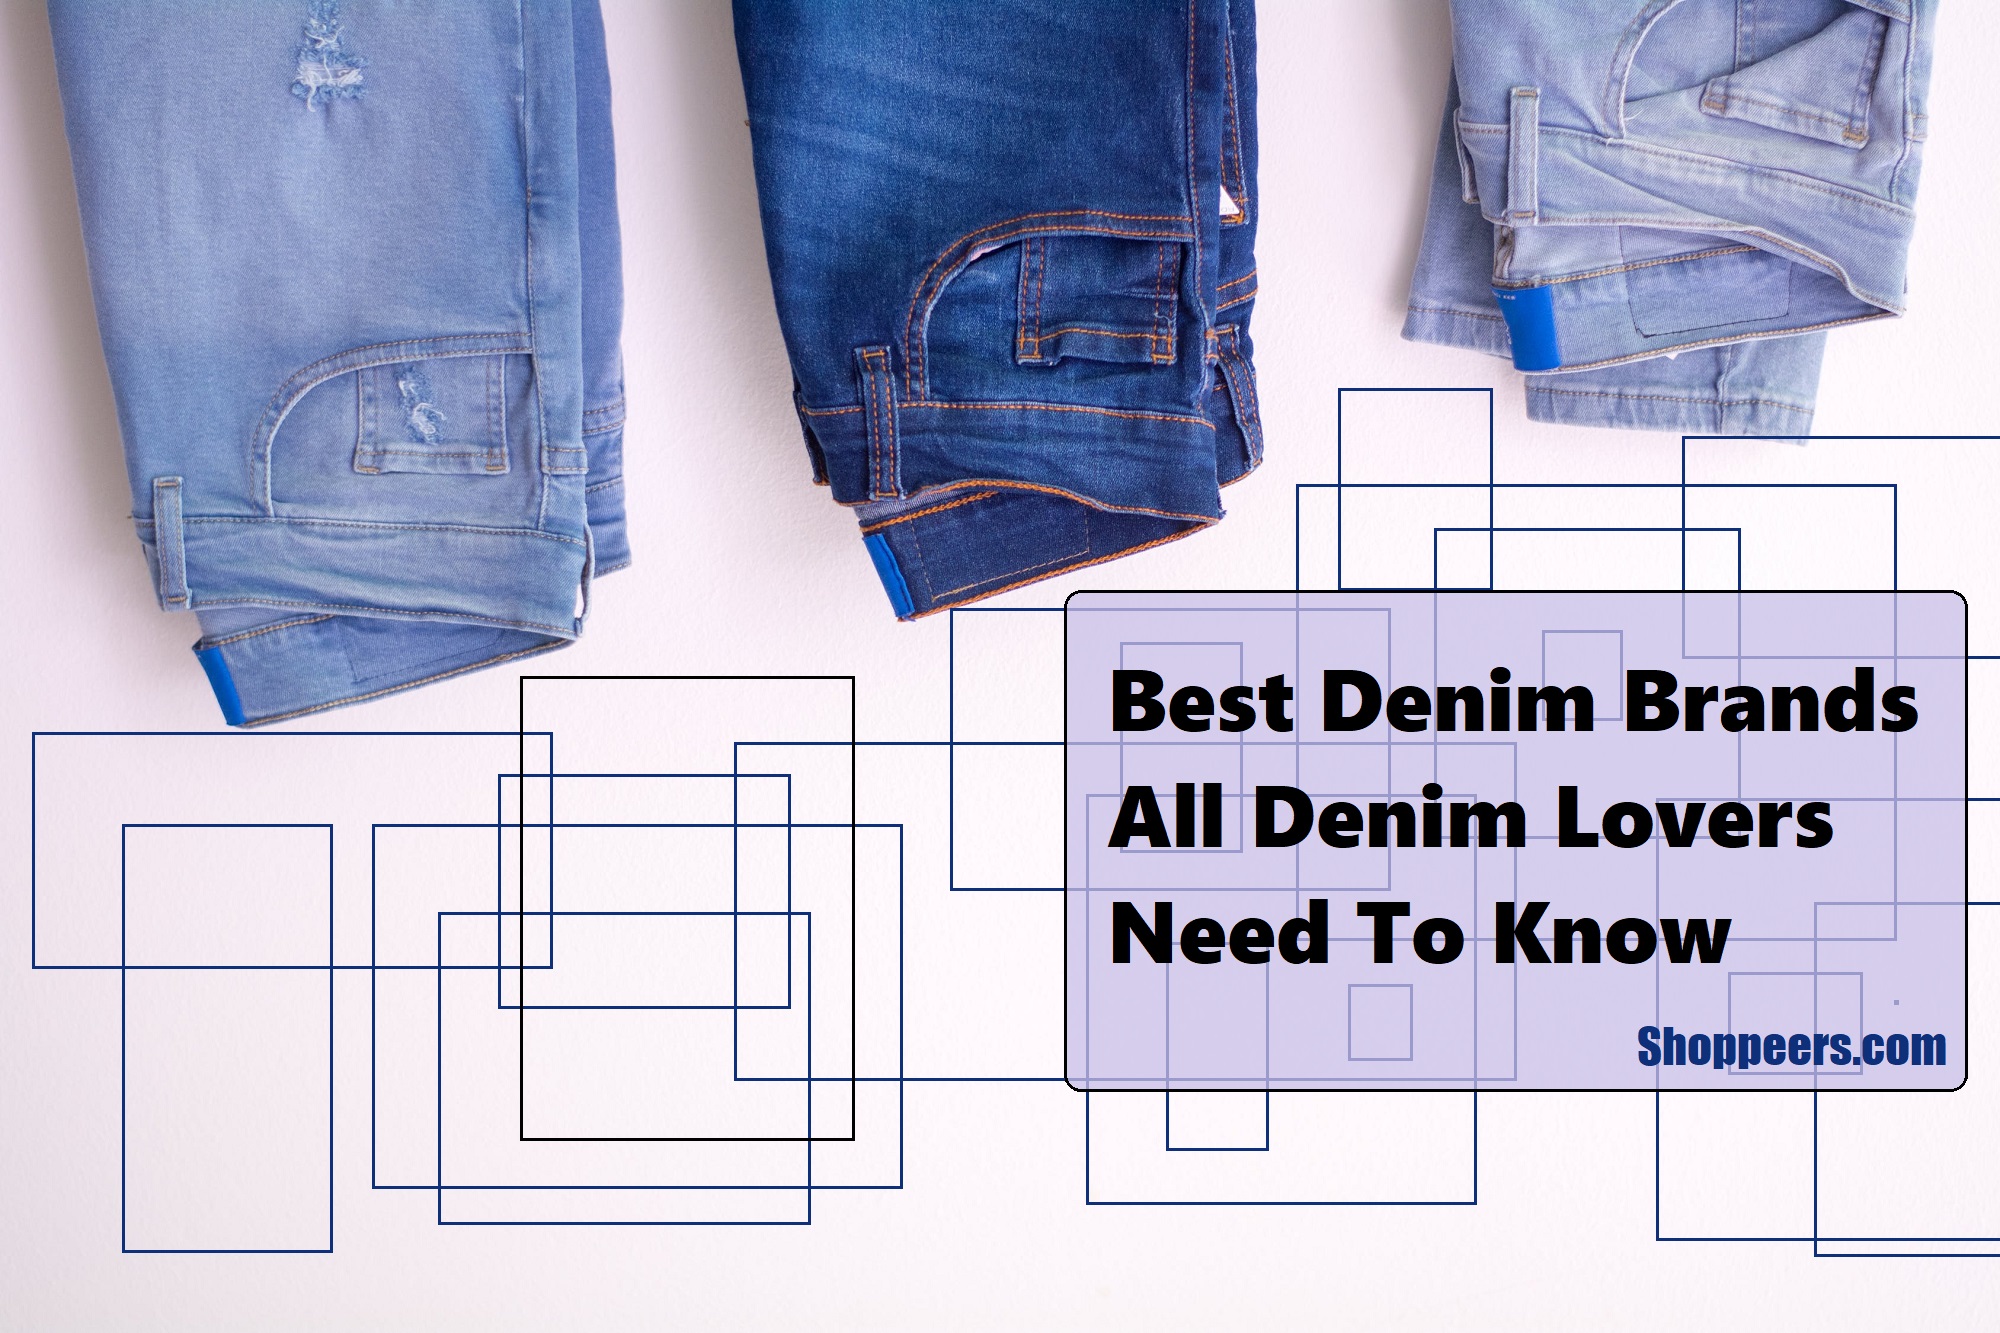 Best Denim Brands All Denim Lovers Need To Know - Shoppeers